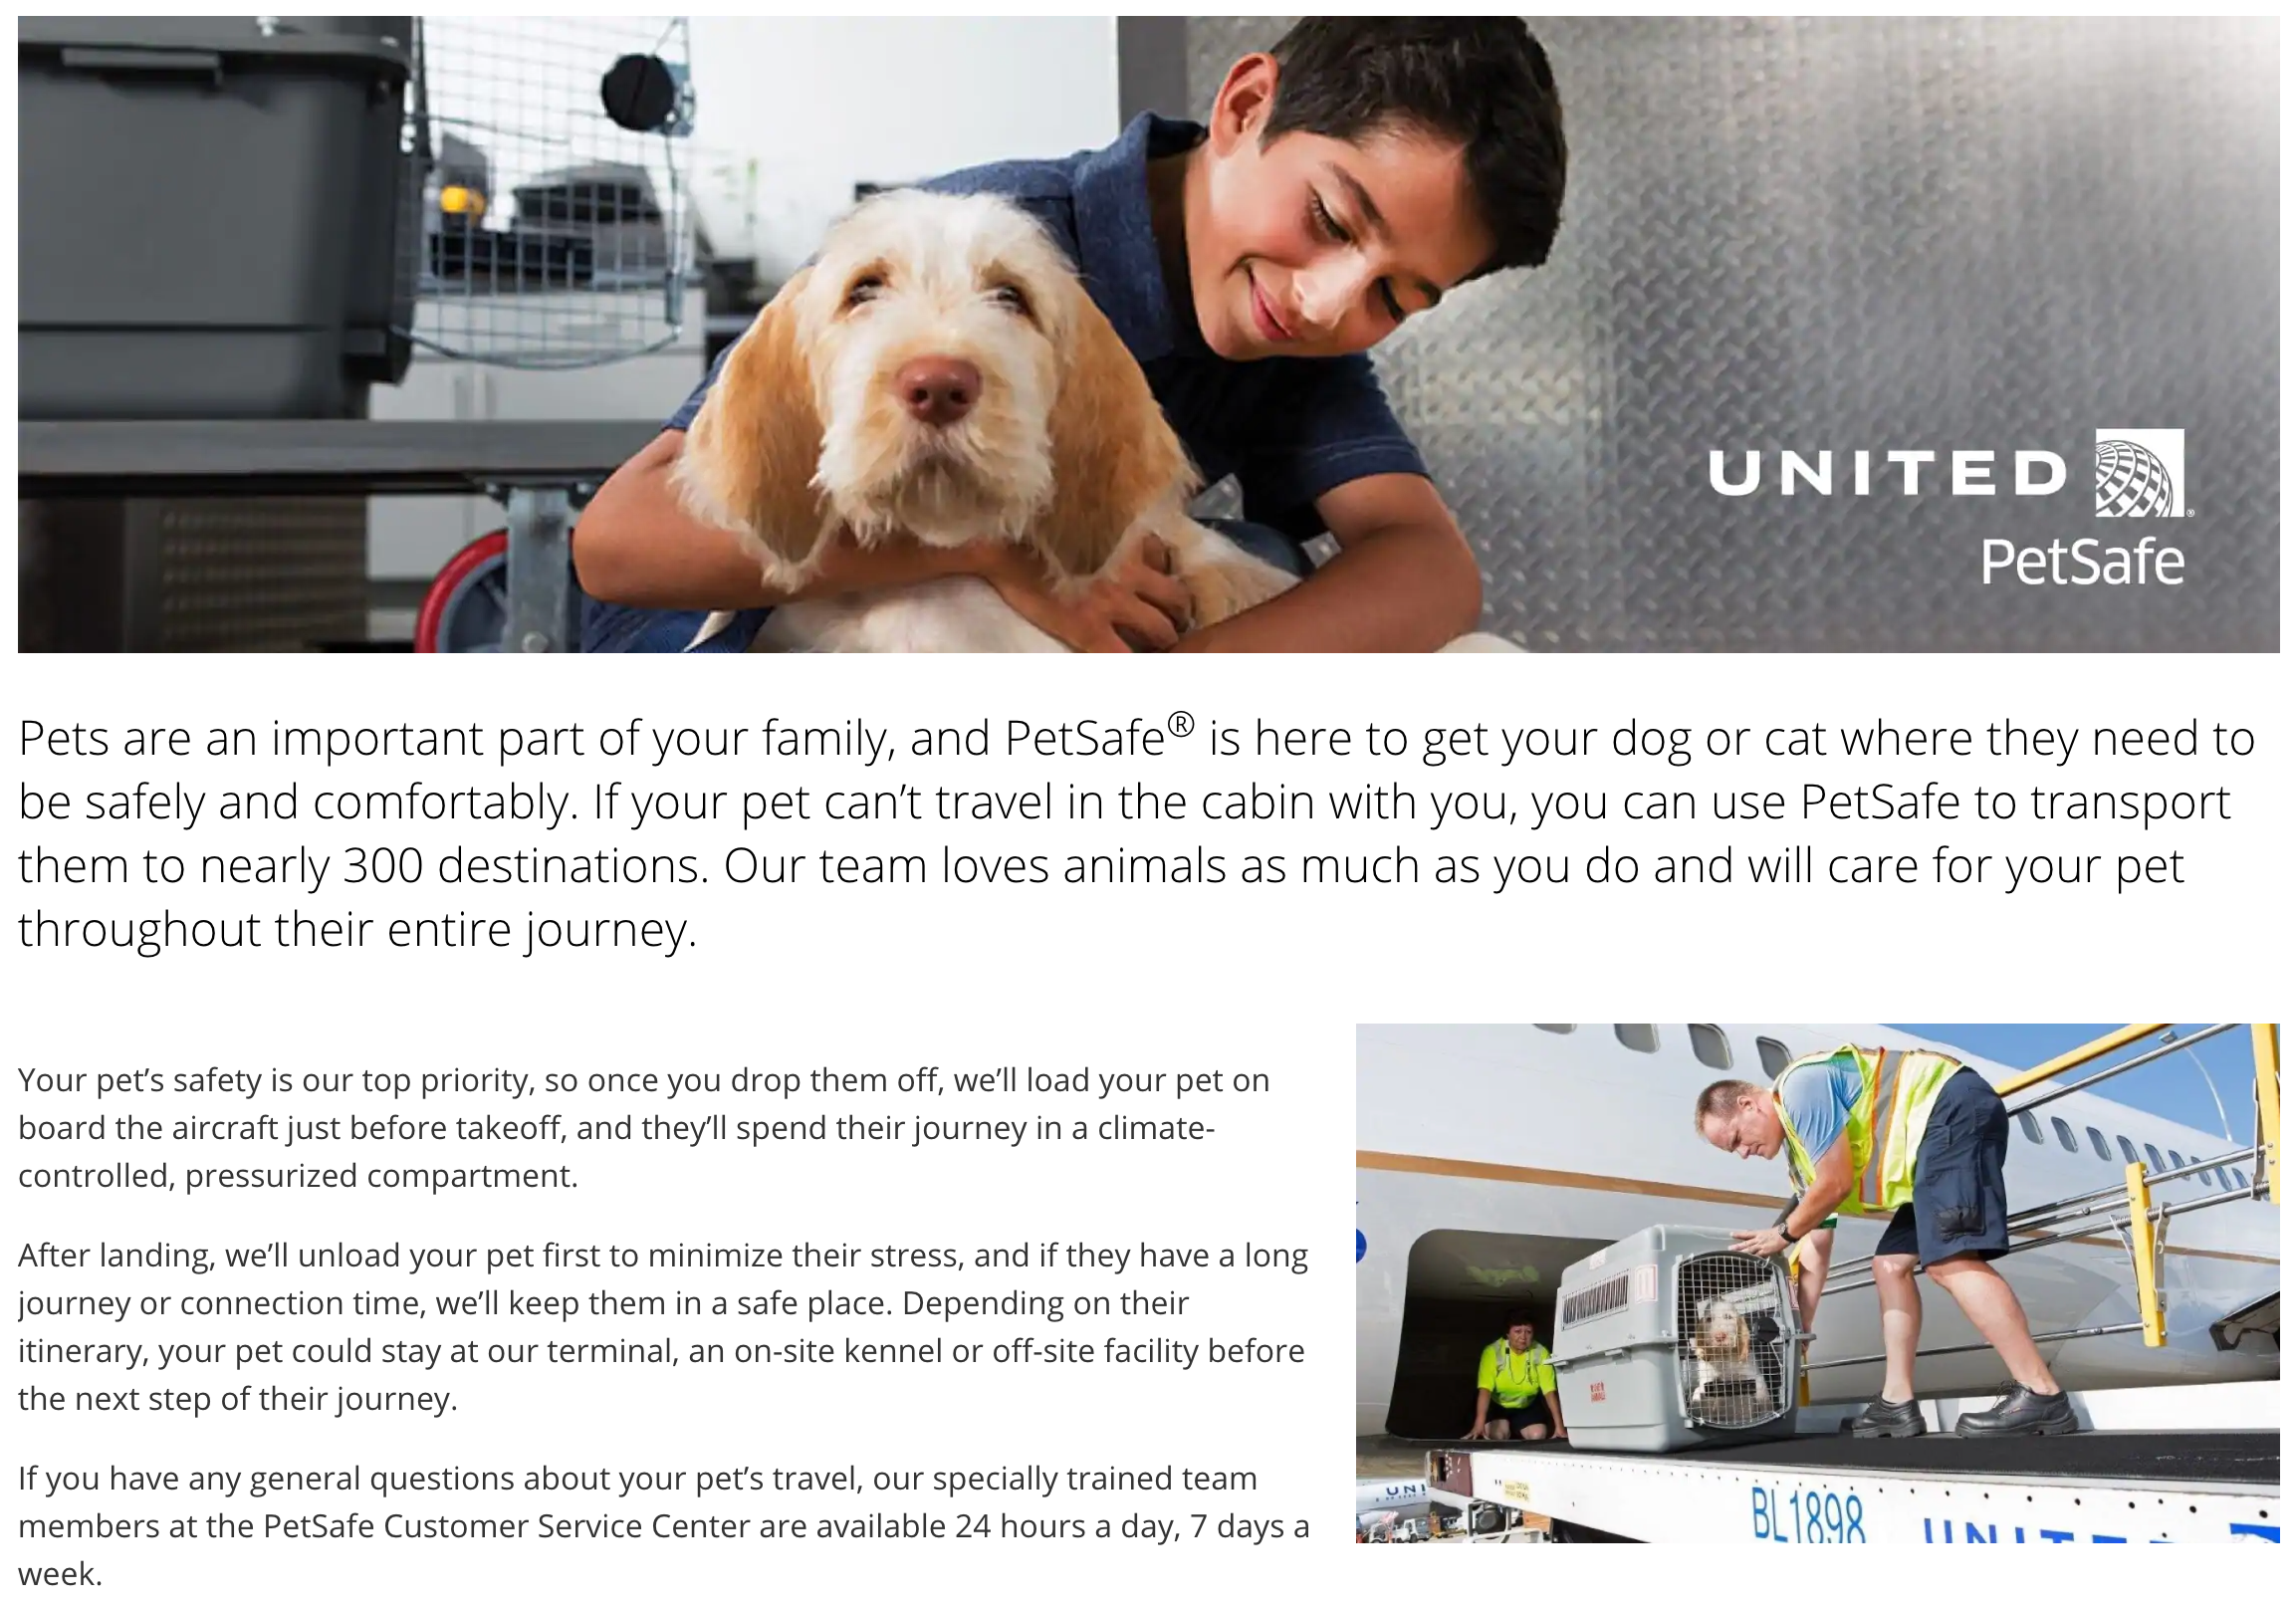 United becomes the final 'Big 3' airline to ban emotional support animals -  The Points Guy